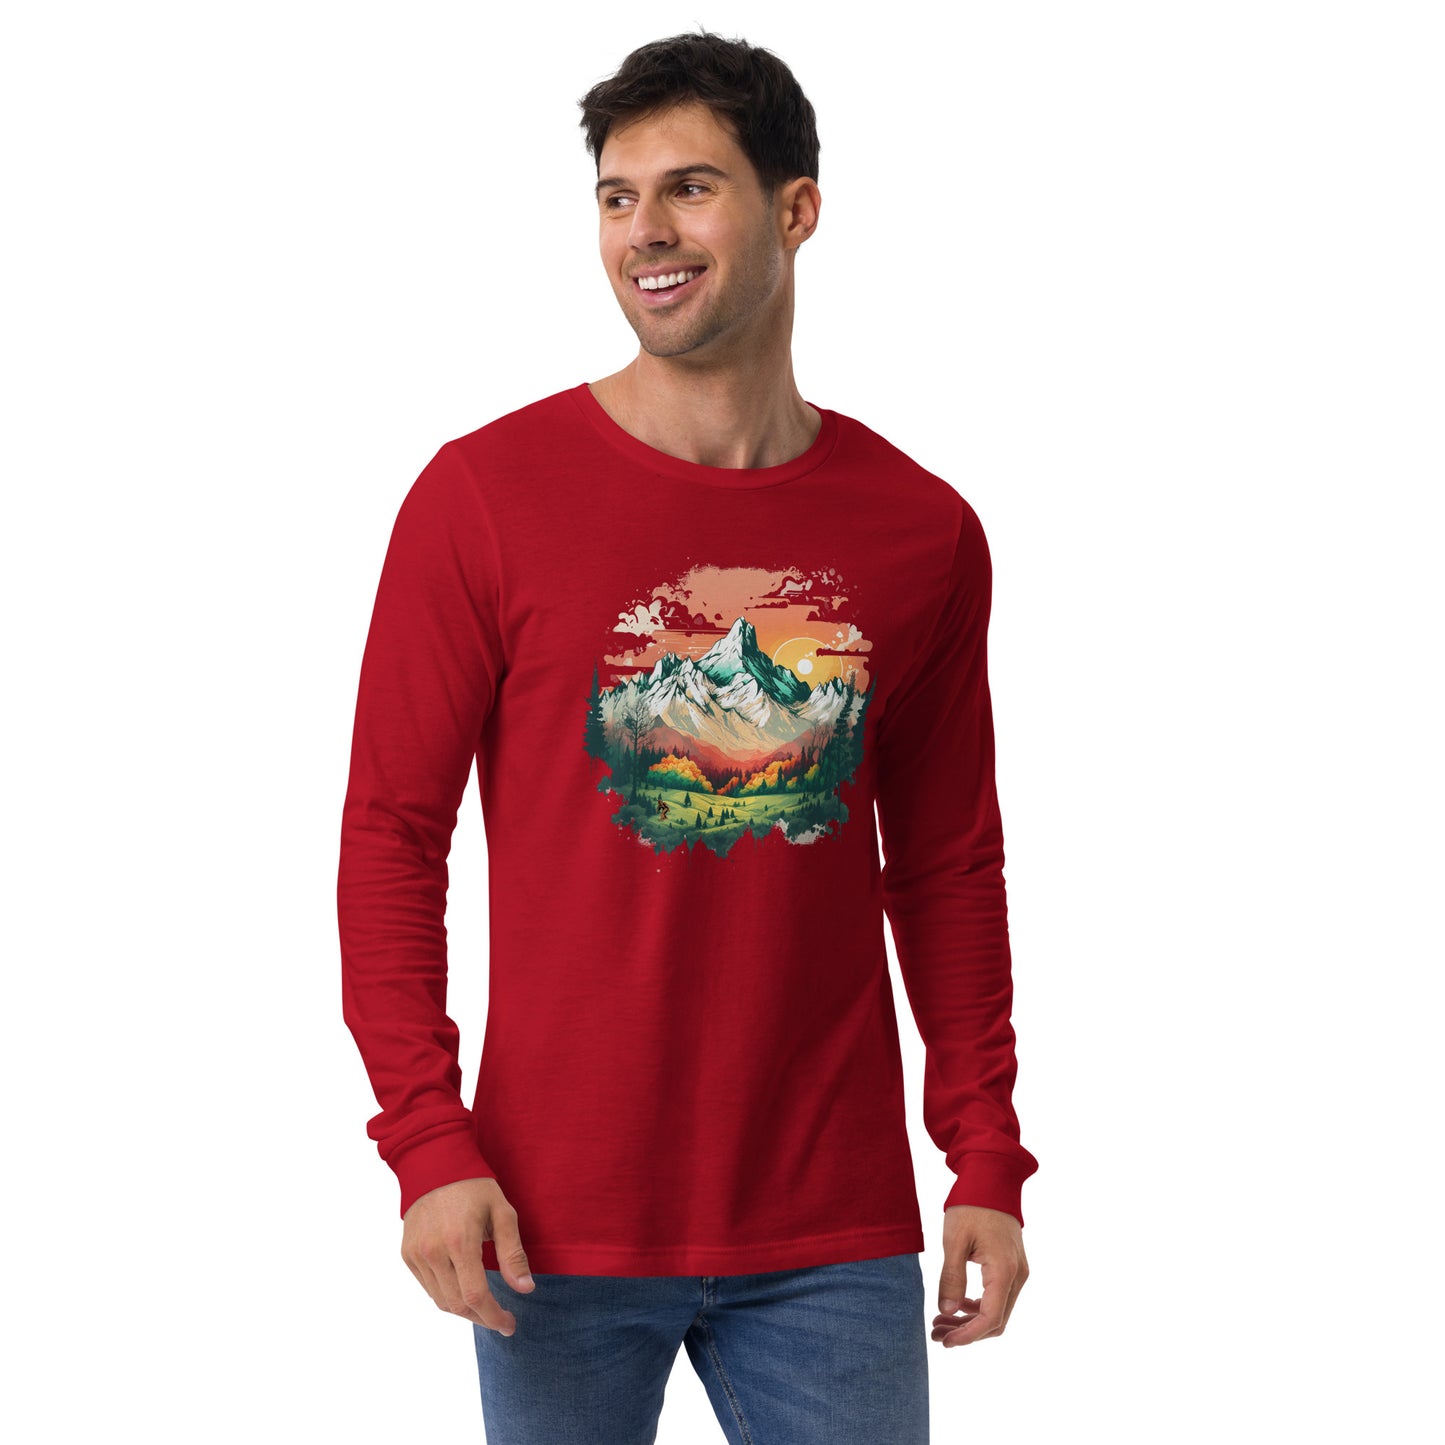 The Great Outdoors Unisex Long Sleeve Shirt